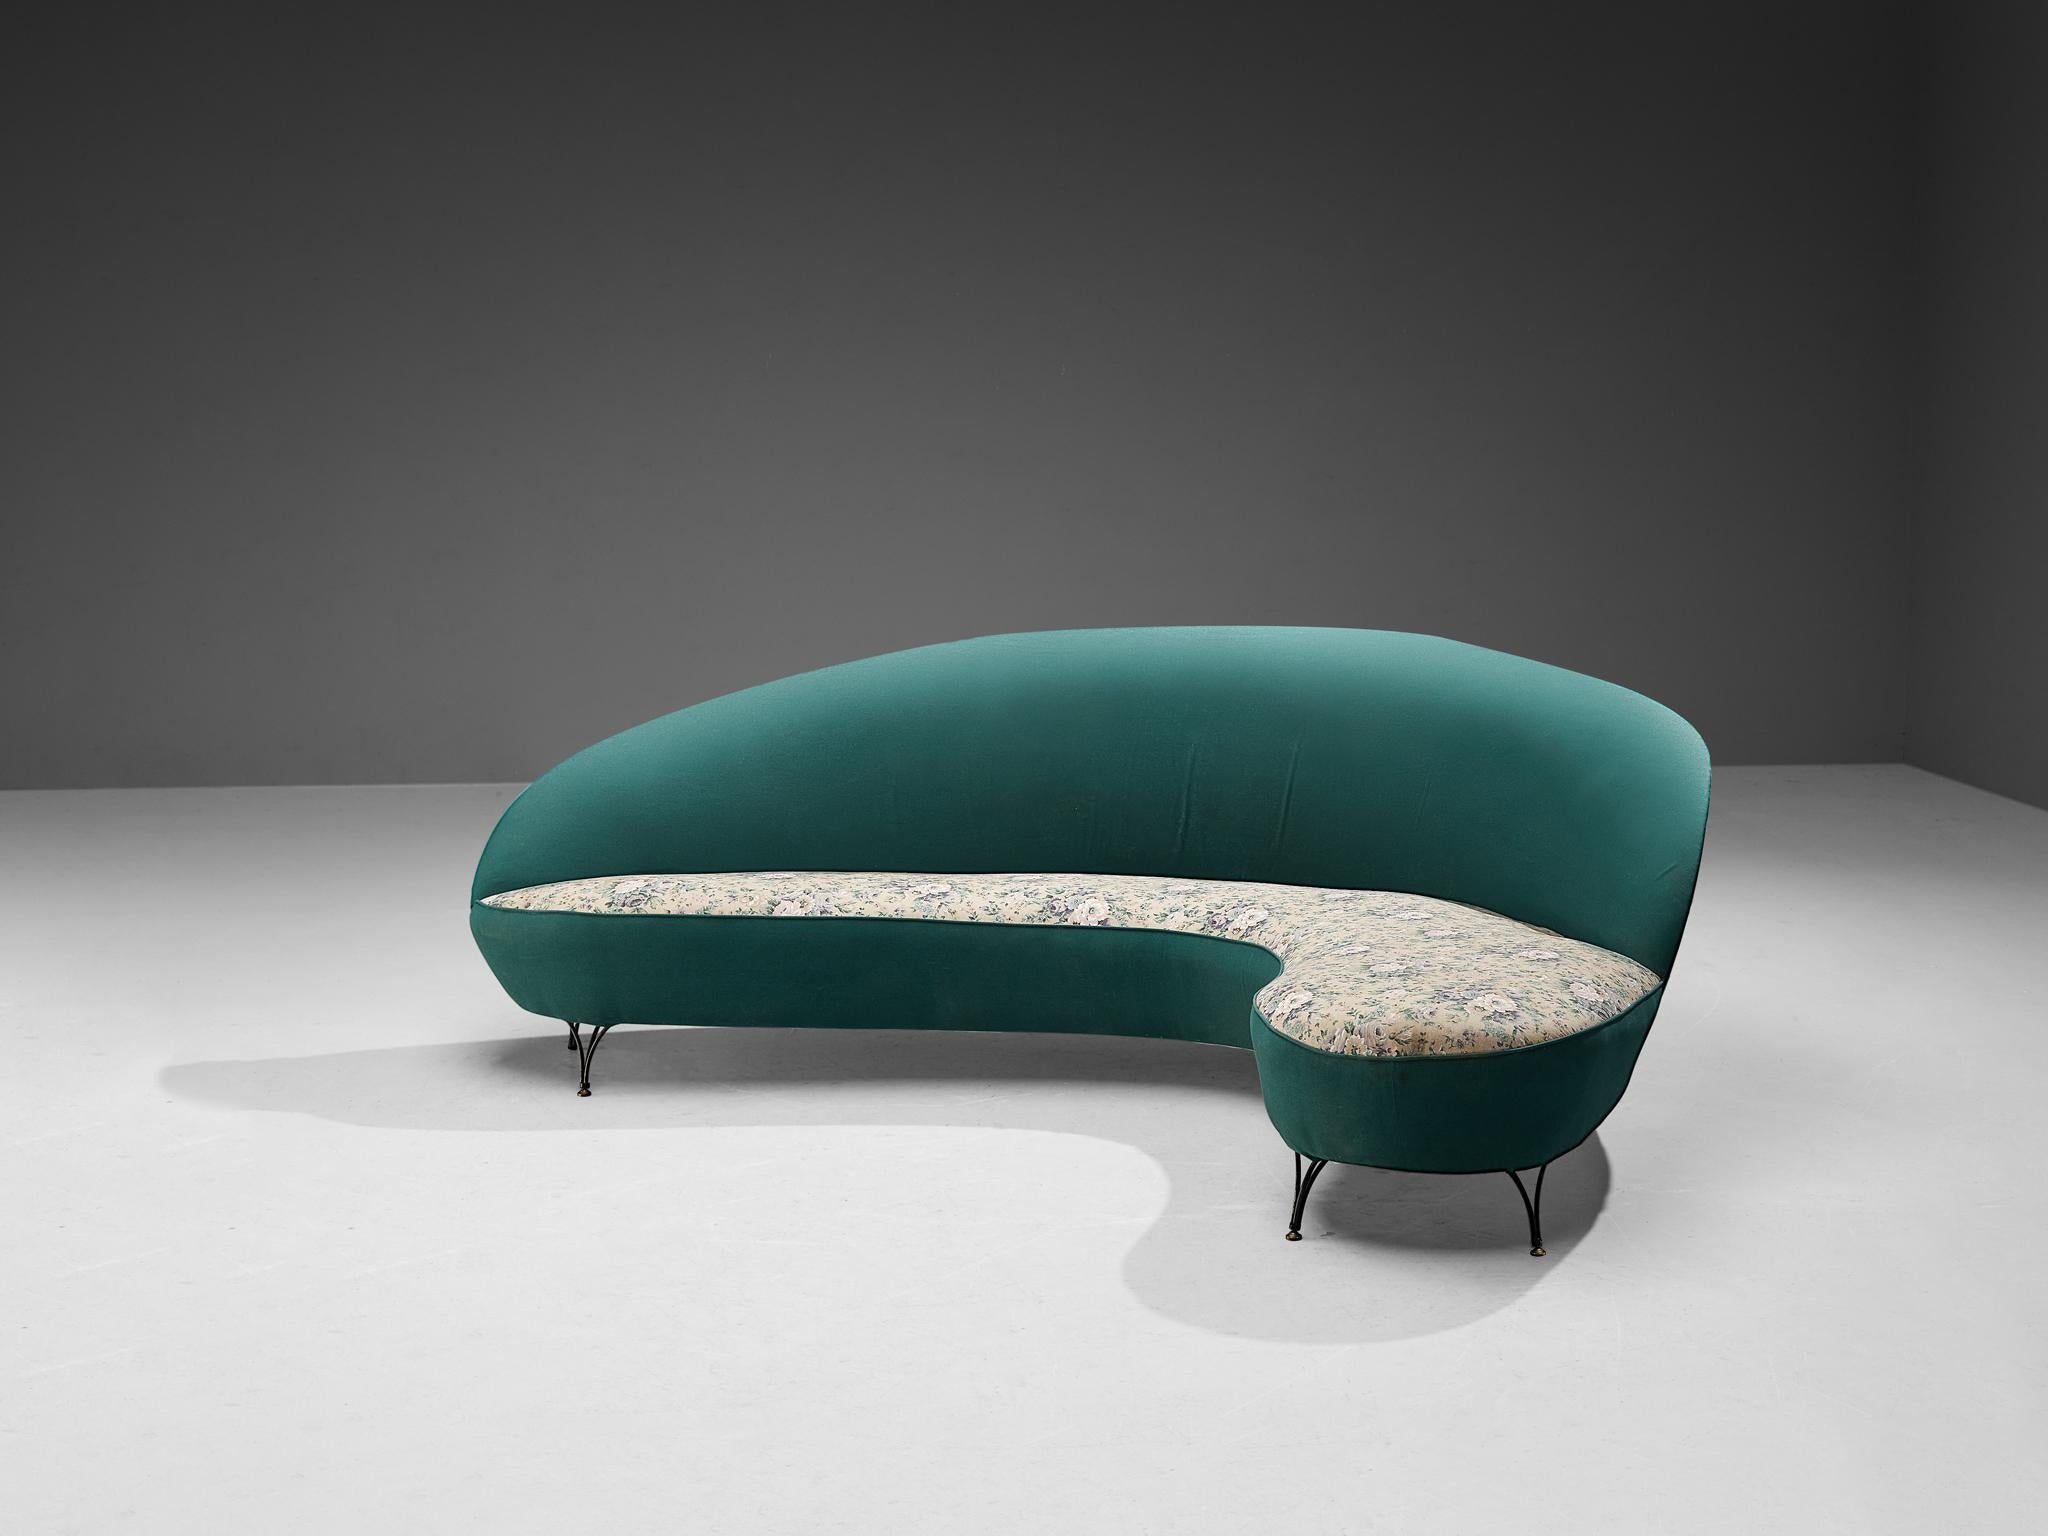 Mid-20th Century Italian Freeform Curved Sofa in Green Upholstery